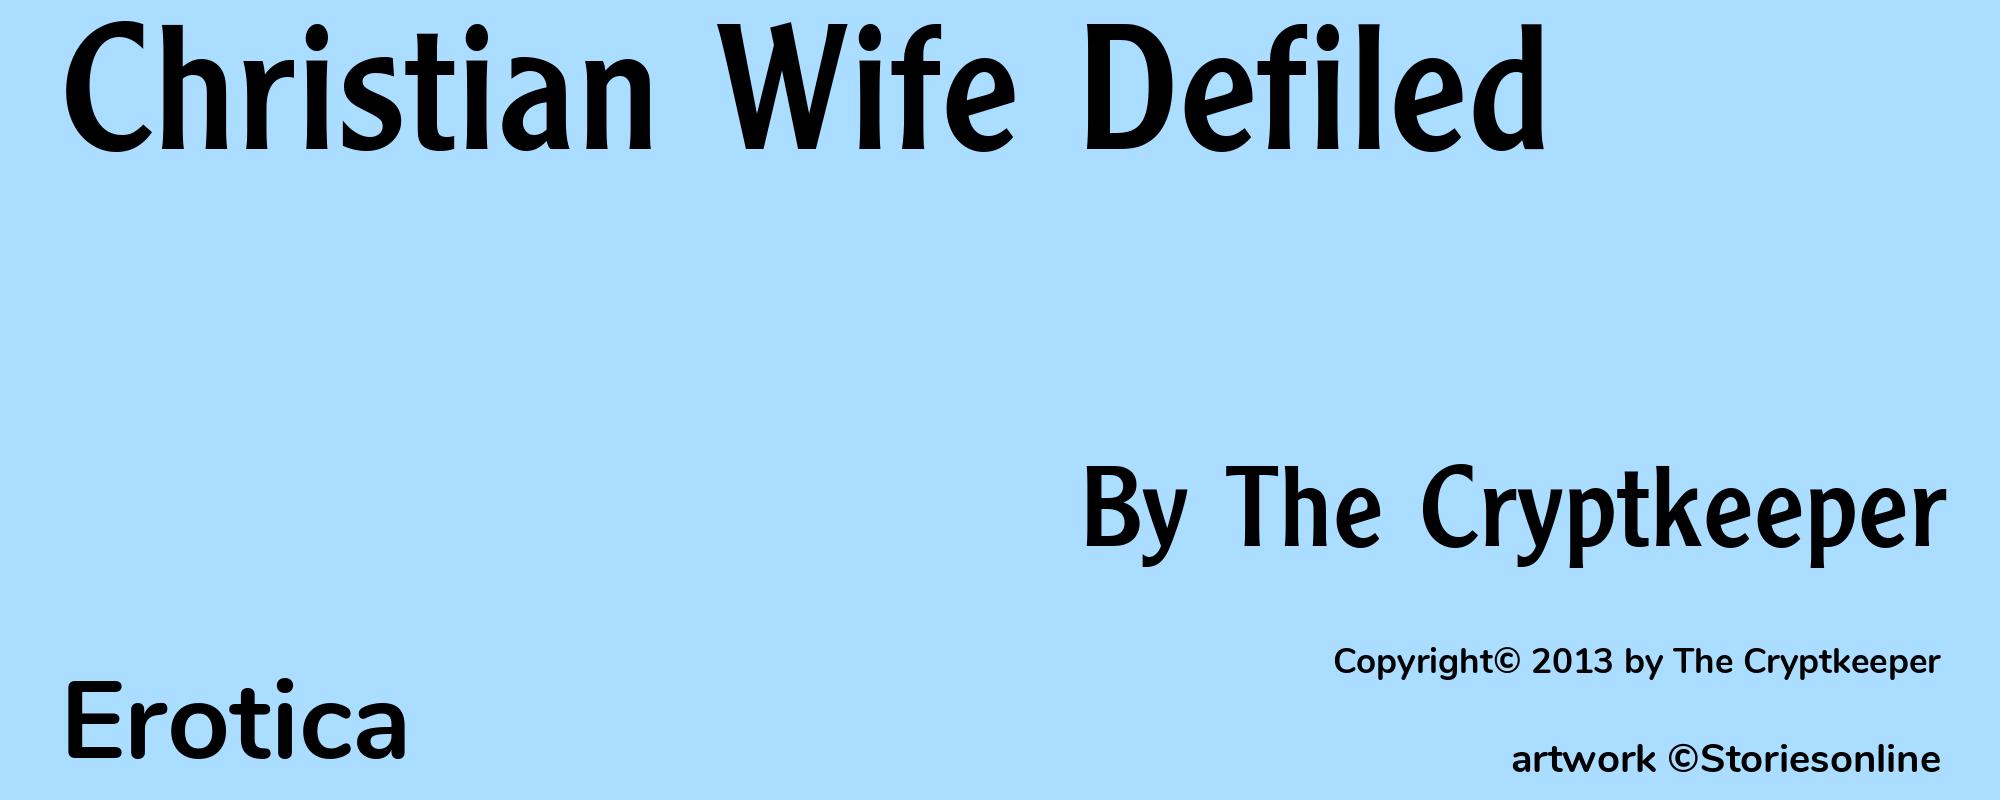 Christian Wife Defiled - Cover